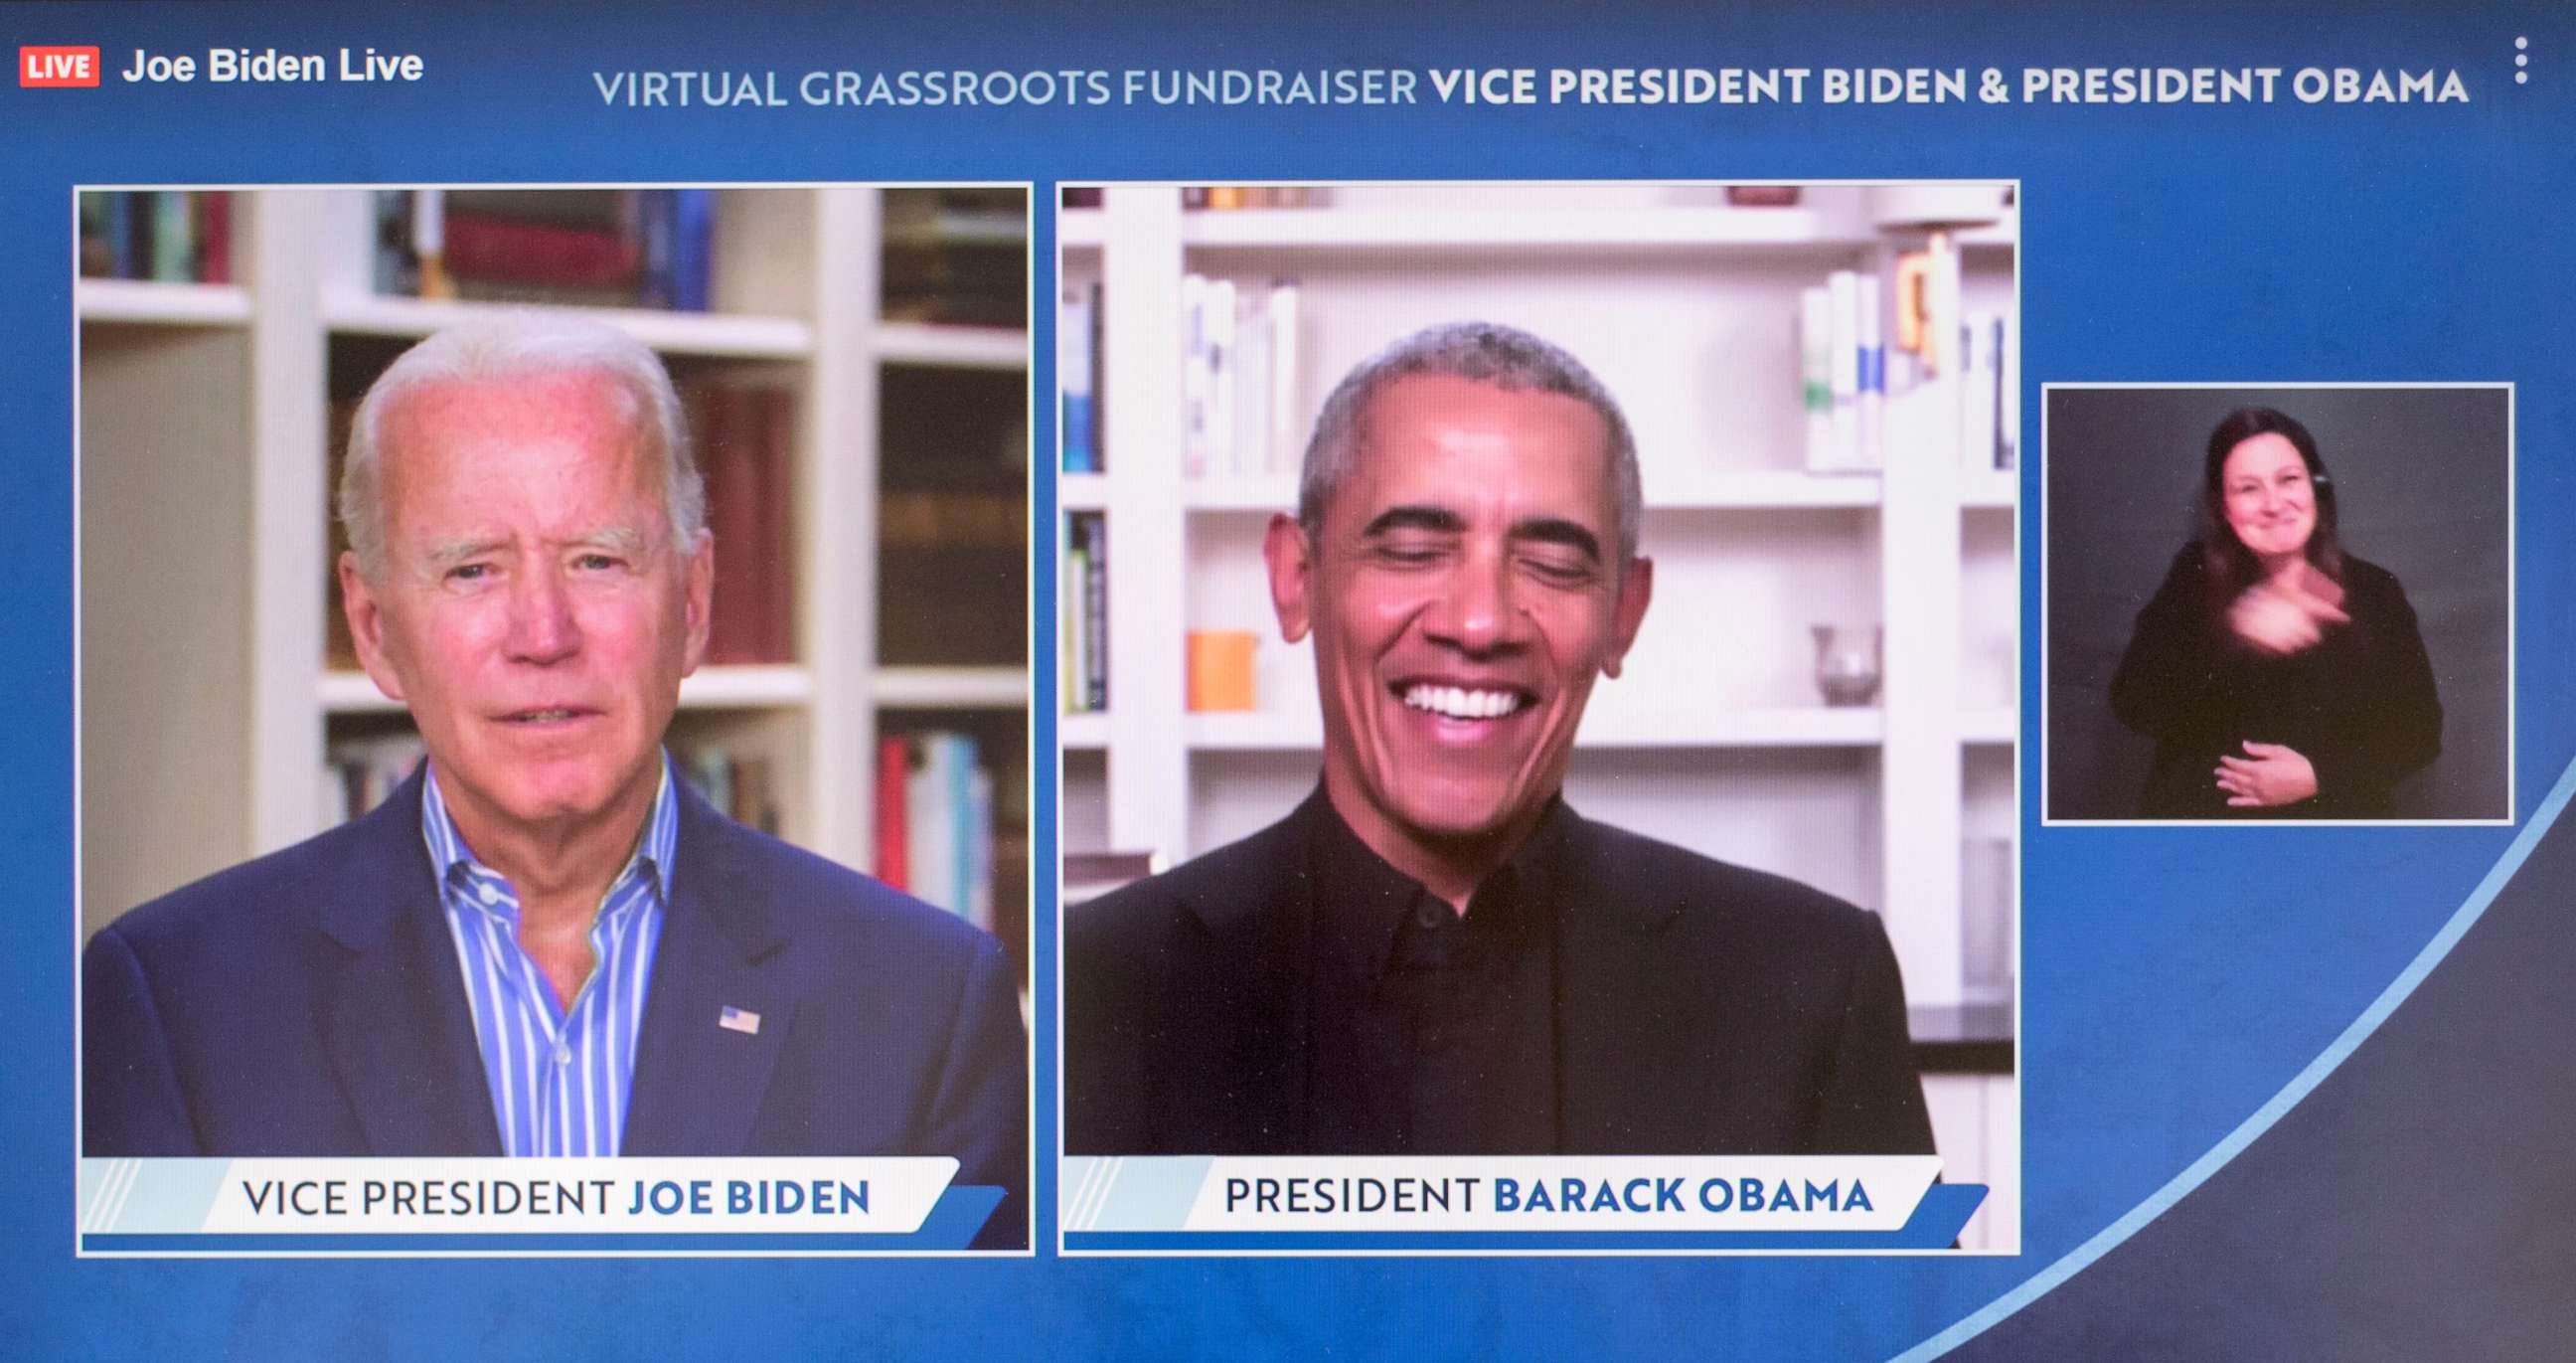 PHOTO: A screen grab shows Joe Biden and Barack Obama at a virtual grass roots fundraiser for the Biden 2020 presidential campaign.